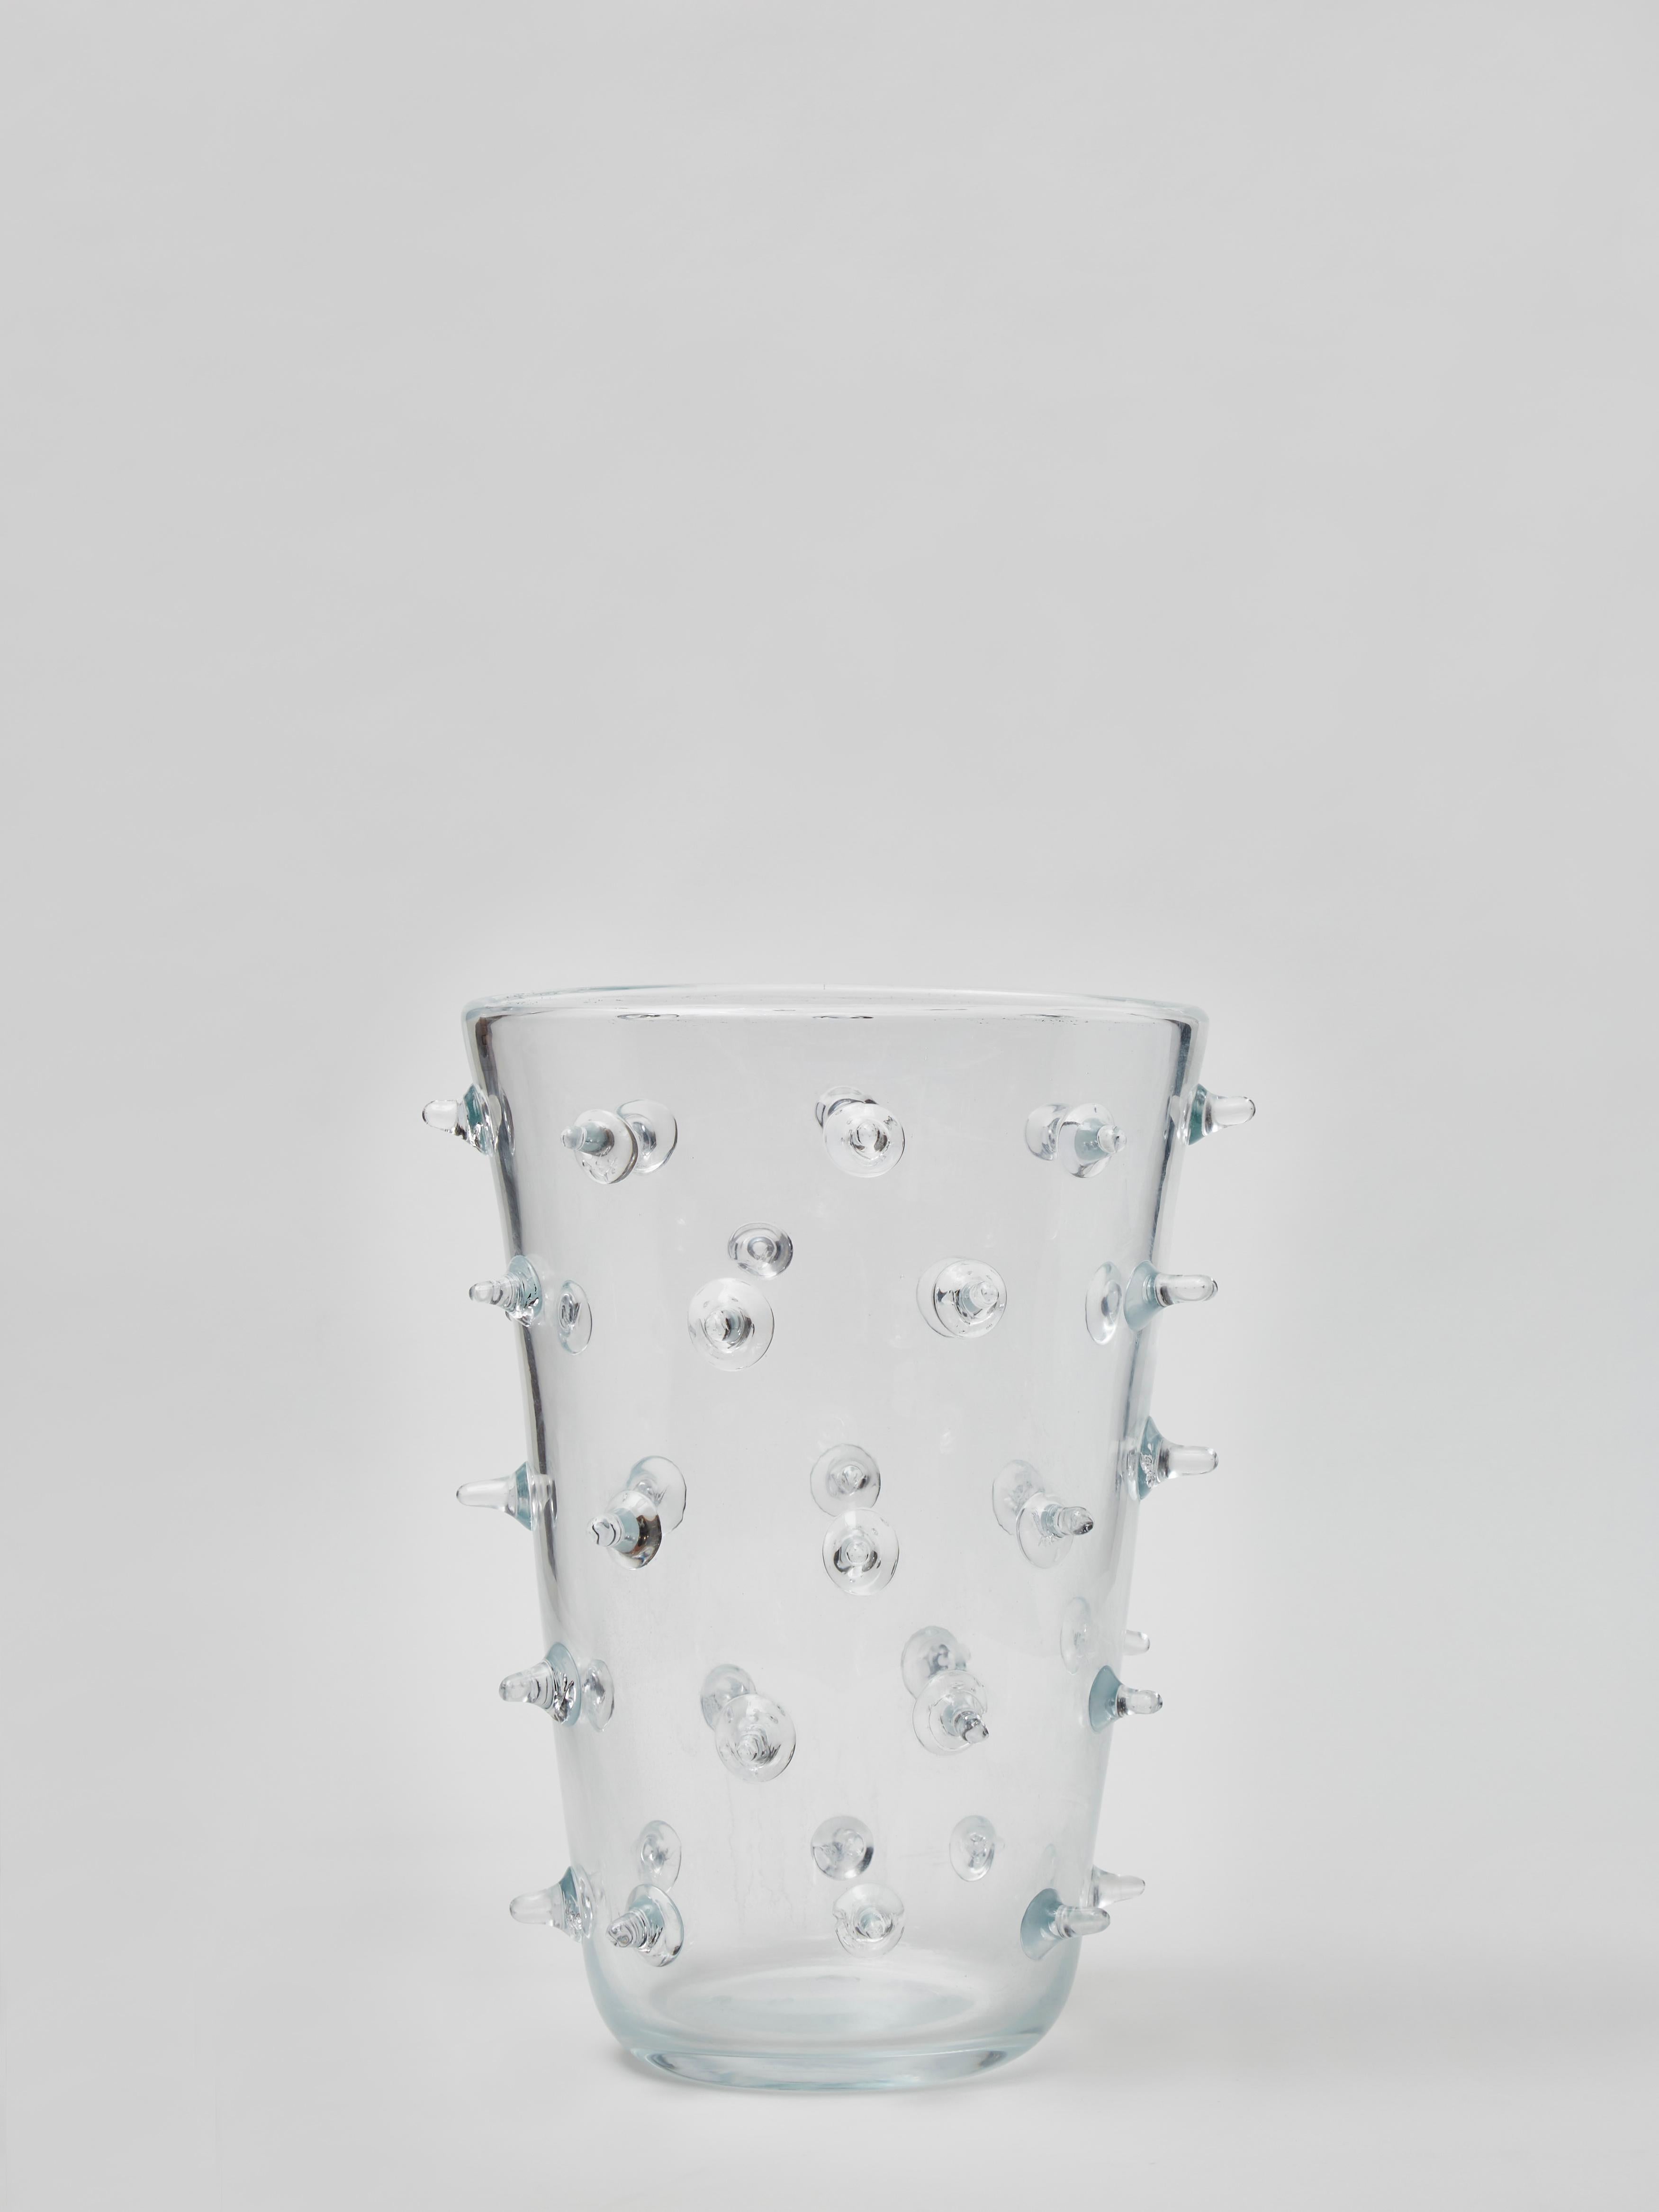 Pair of clear Murano glass wide vases with spikes on the surfaces.